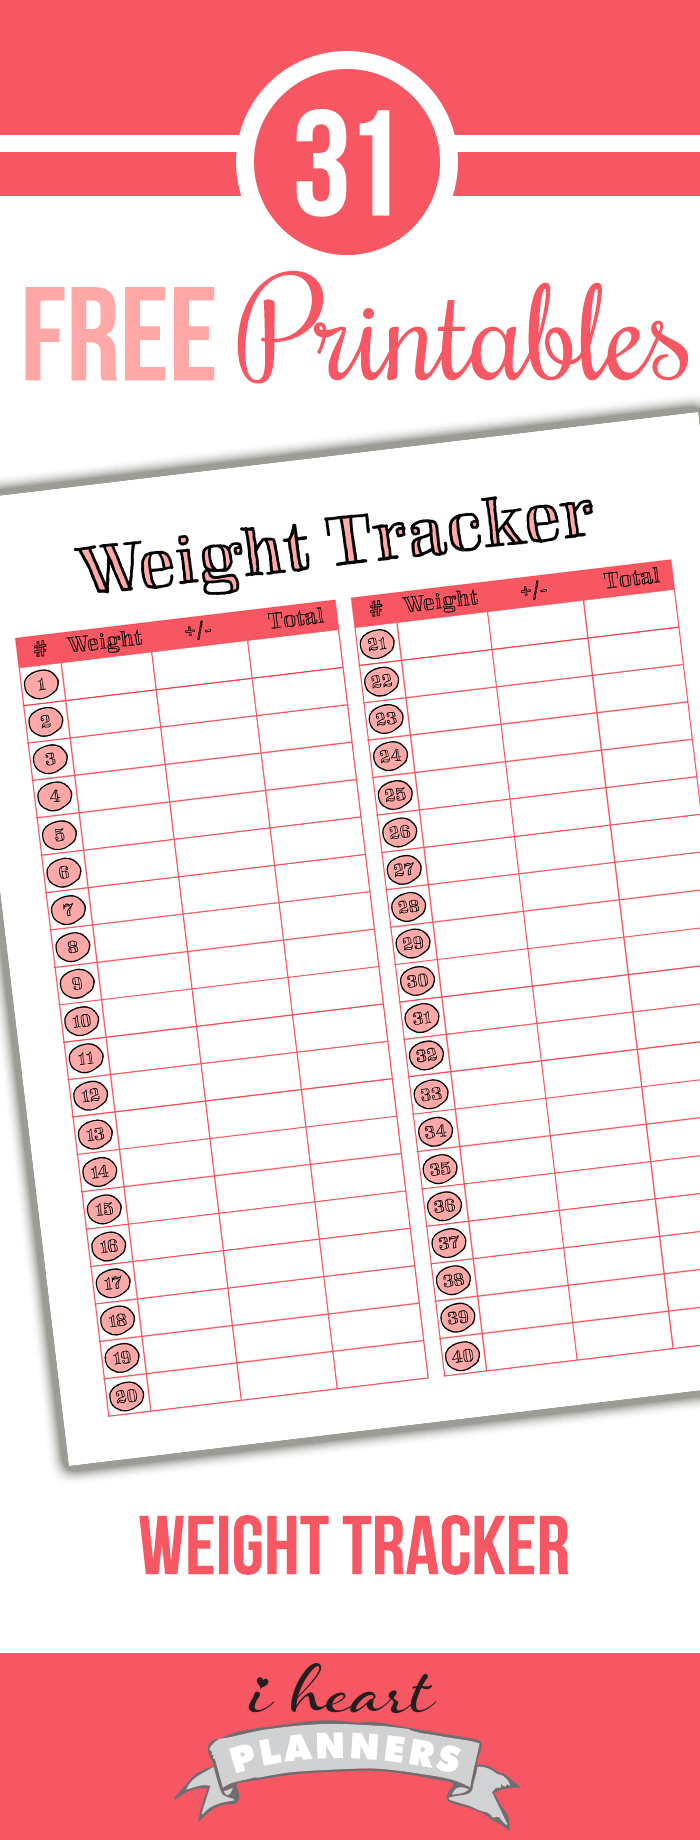 Weekly weight tracker printable